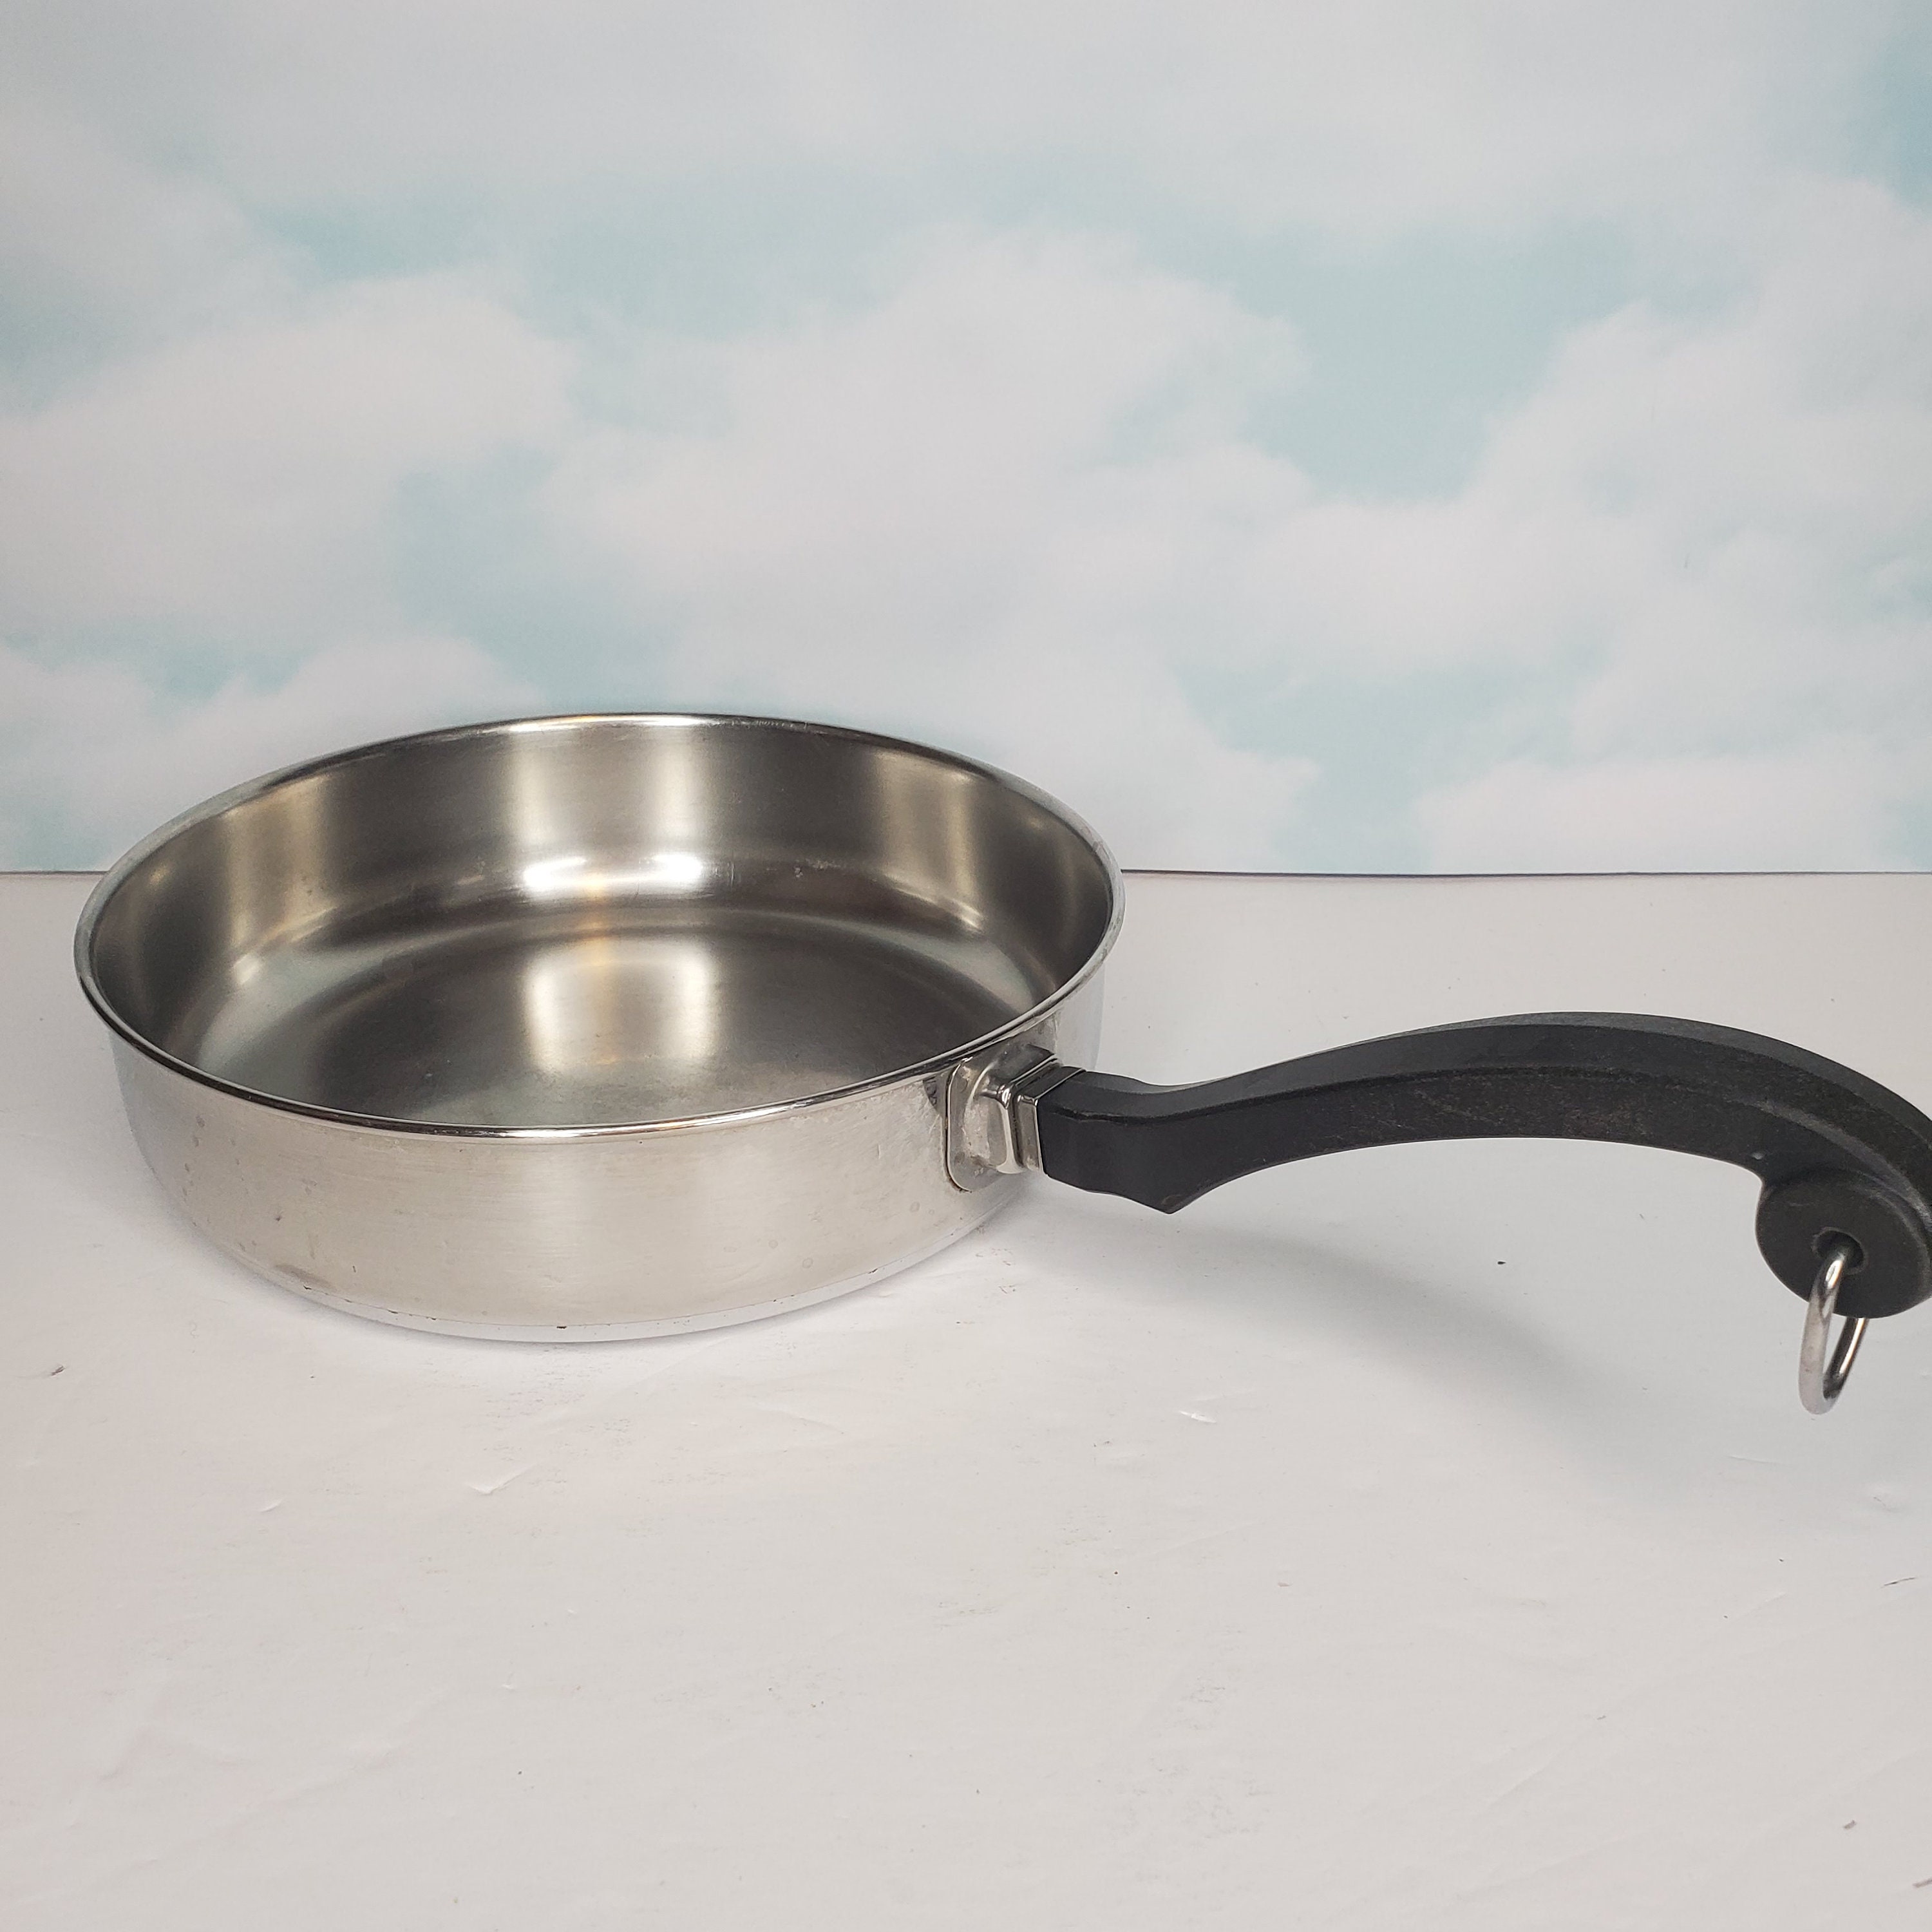 VTG Farberware 1 1/2 Qt. Sauce Pan W/wo Lid Aluminum Clad Stainless Steel  Made in USA Durable Built to Last 